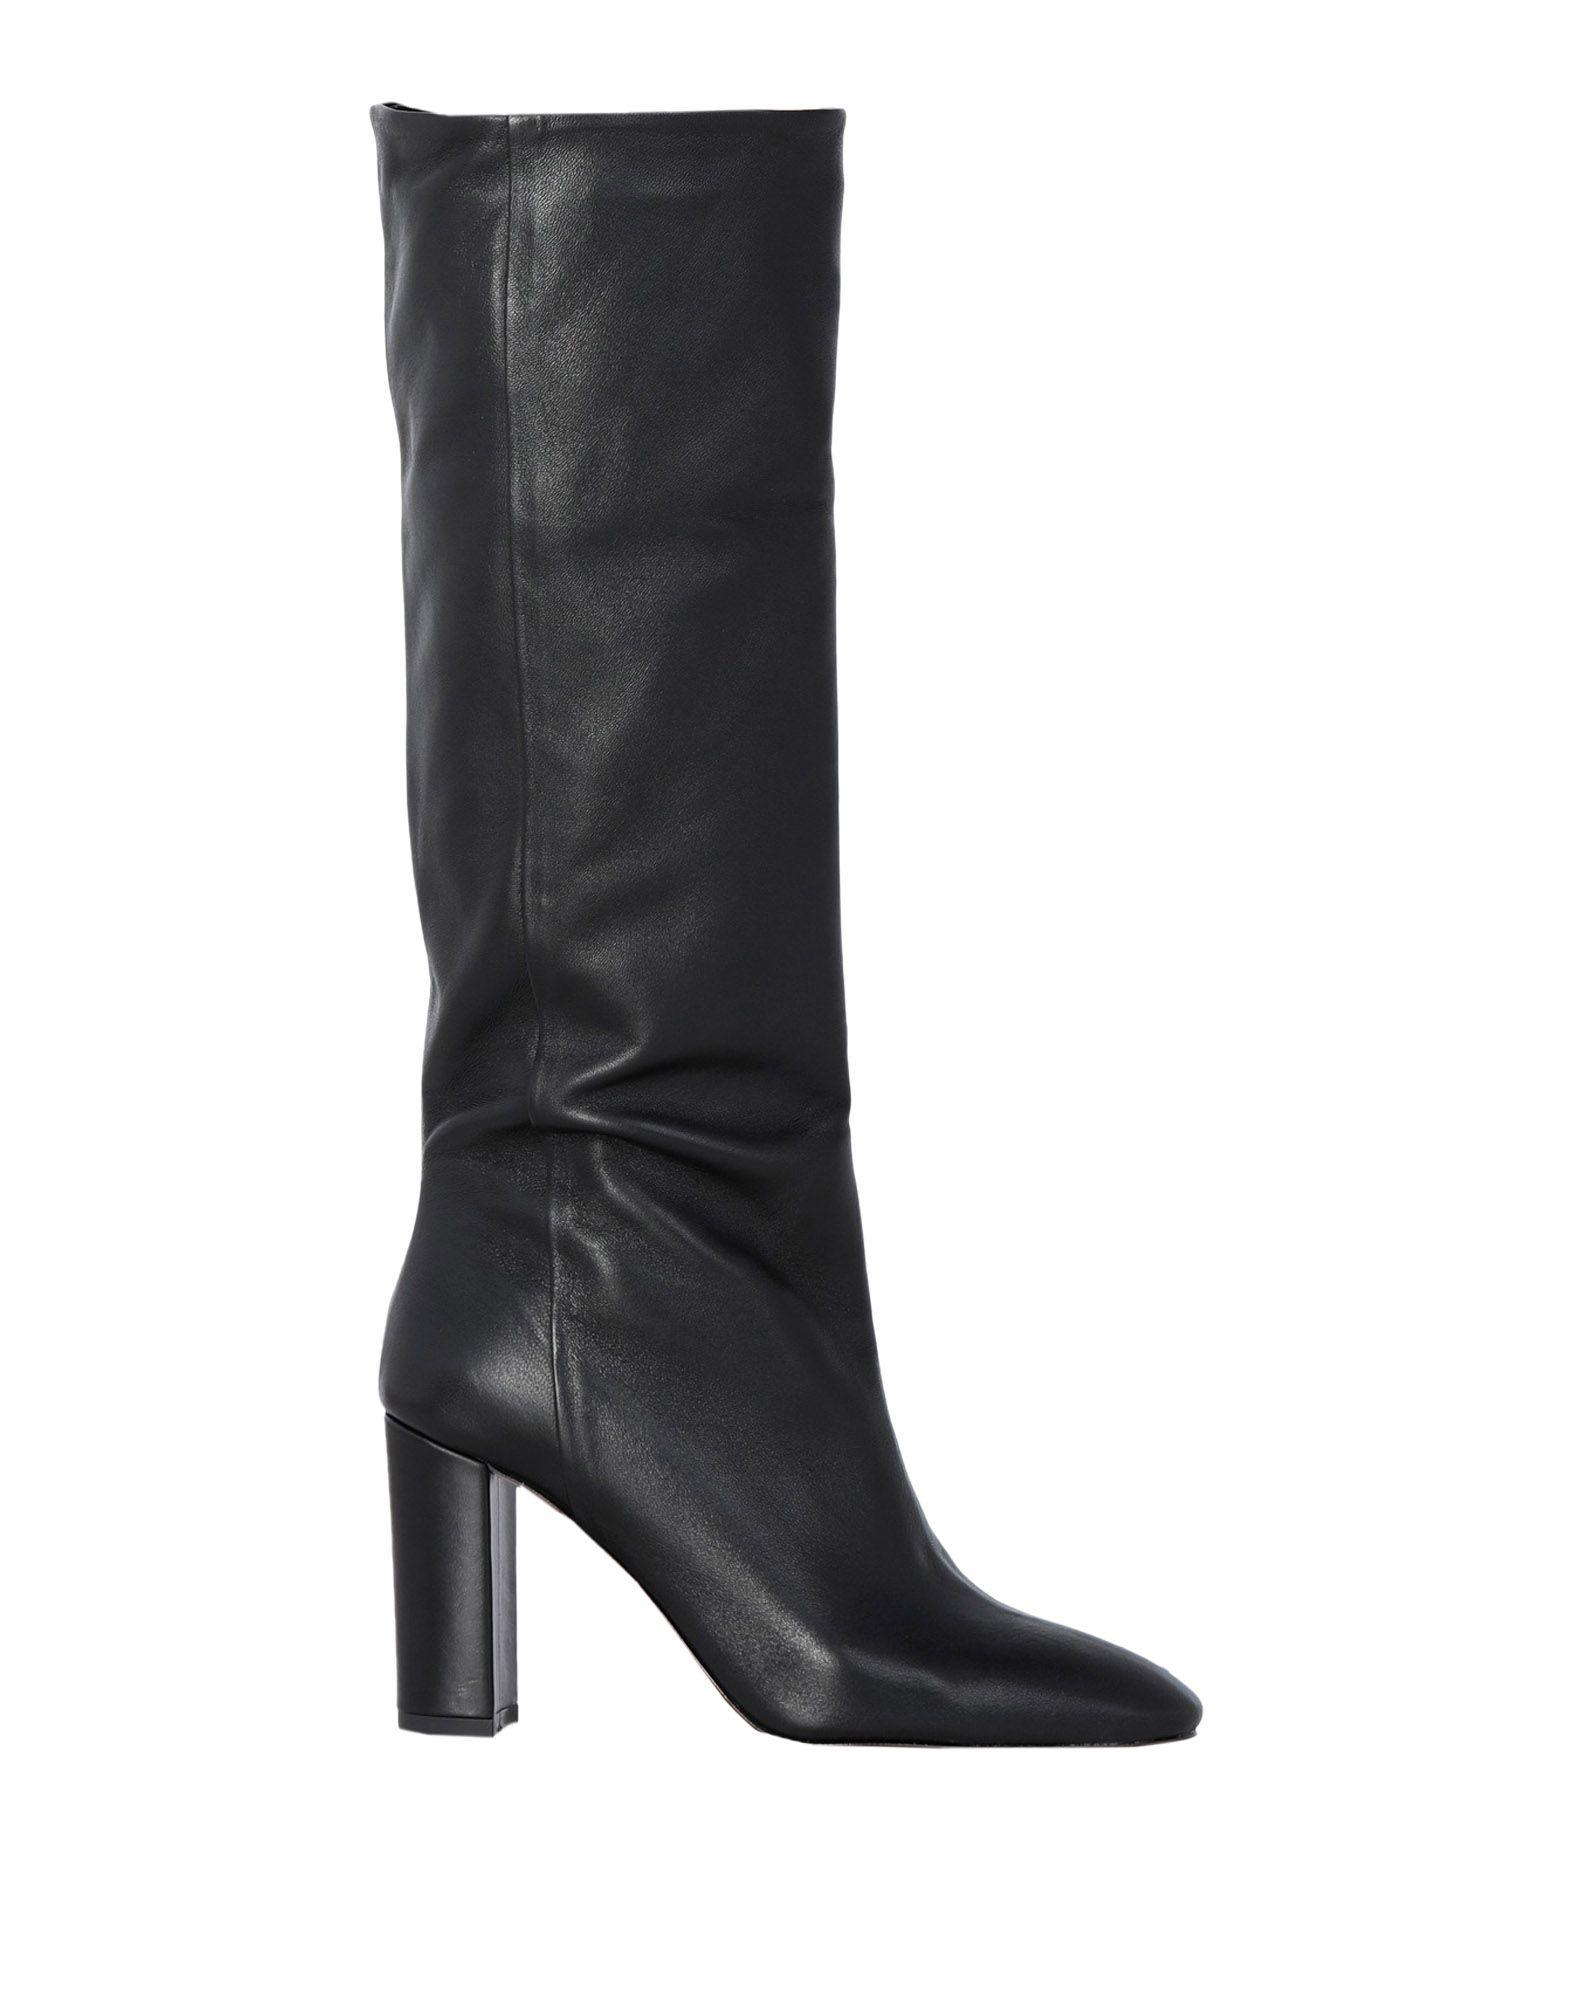 Bianca Di Leather Boots in Black - Lyst